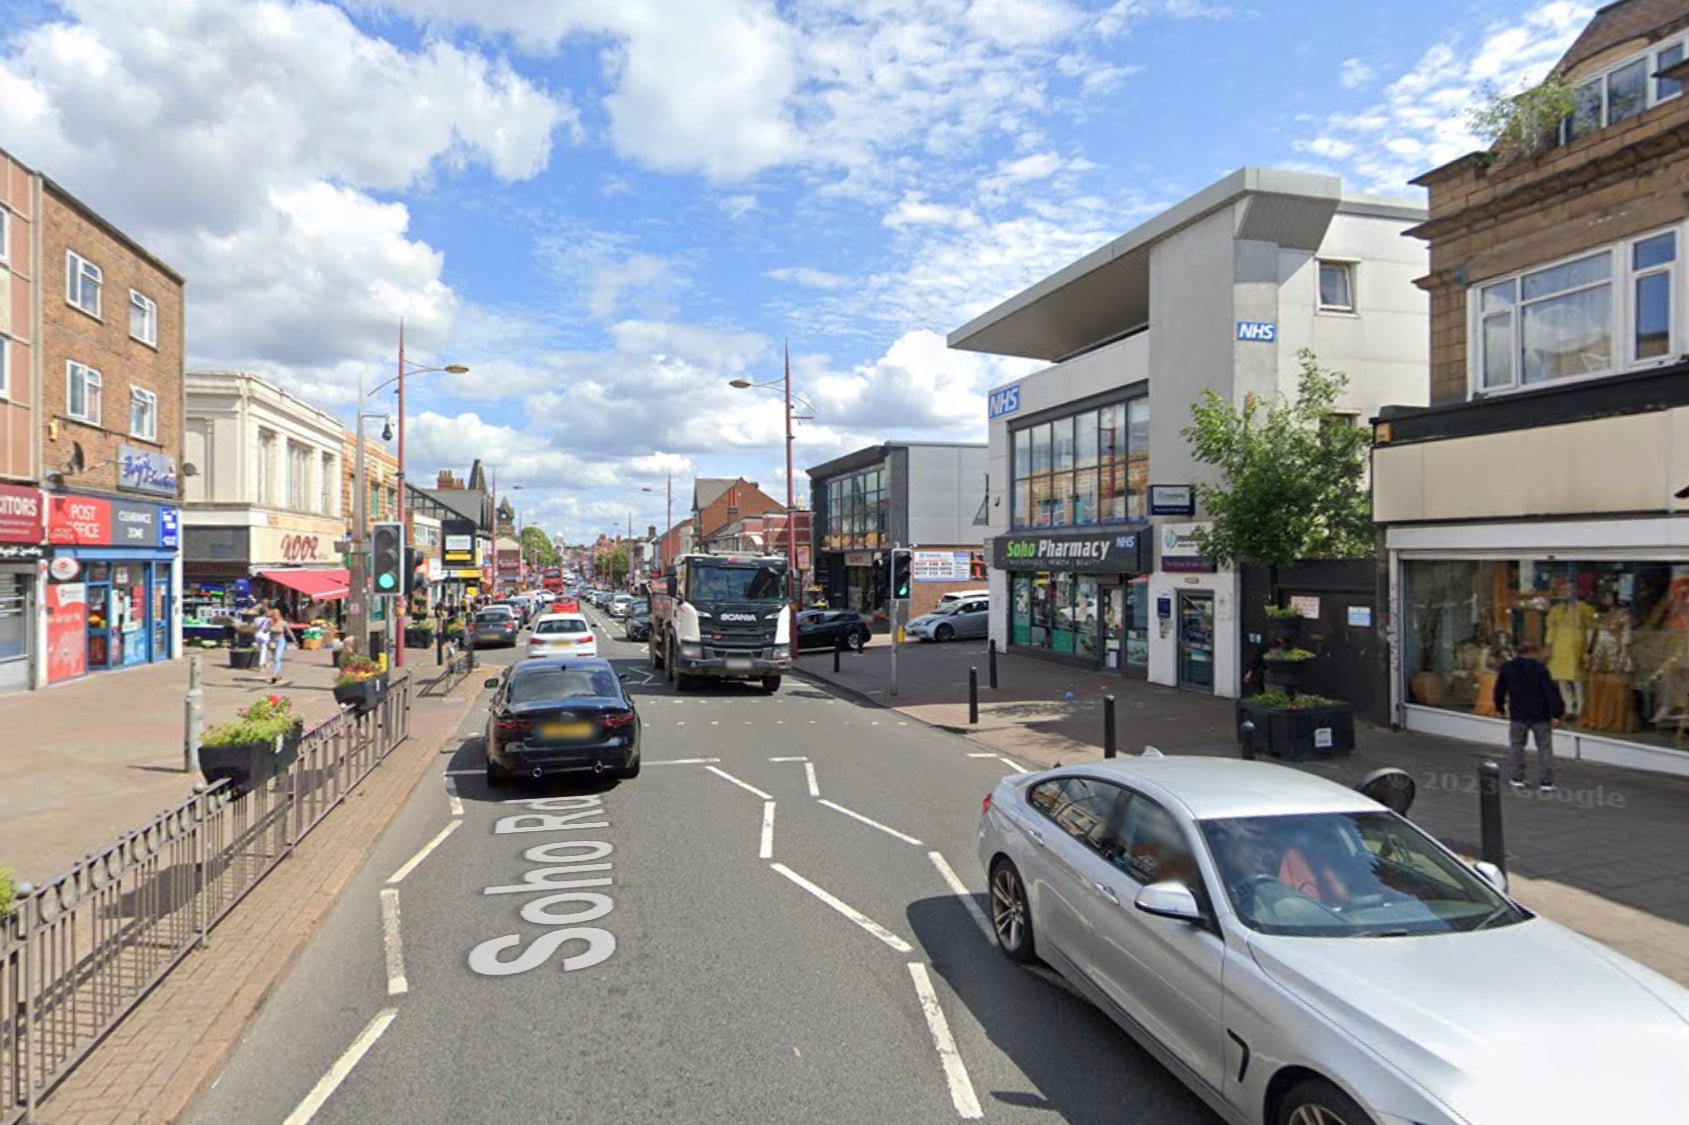 The incident occurred on Sunday evening on Soho Road in Birmingham